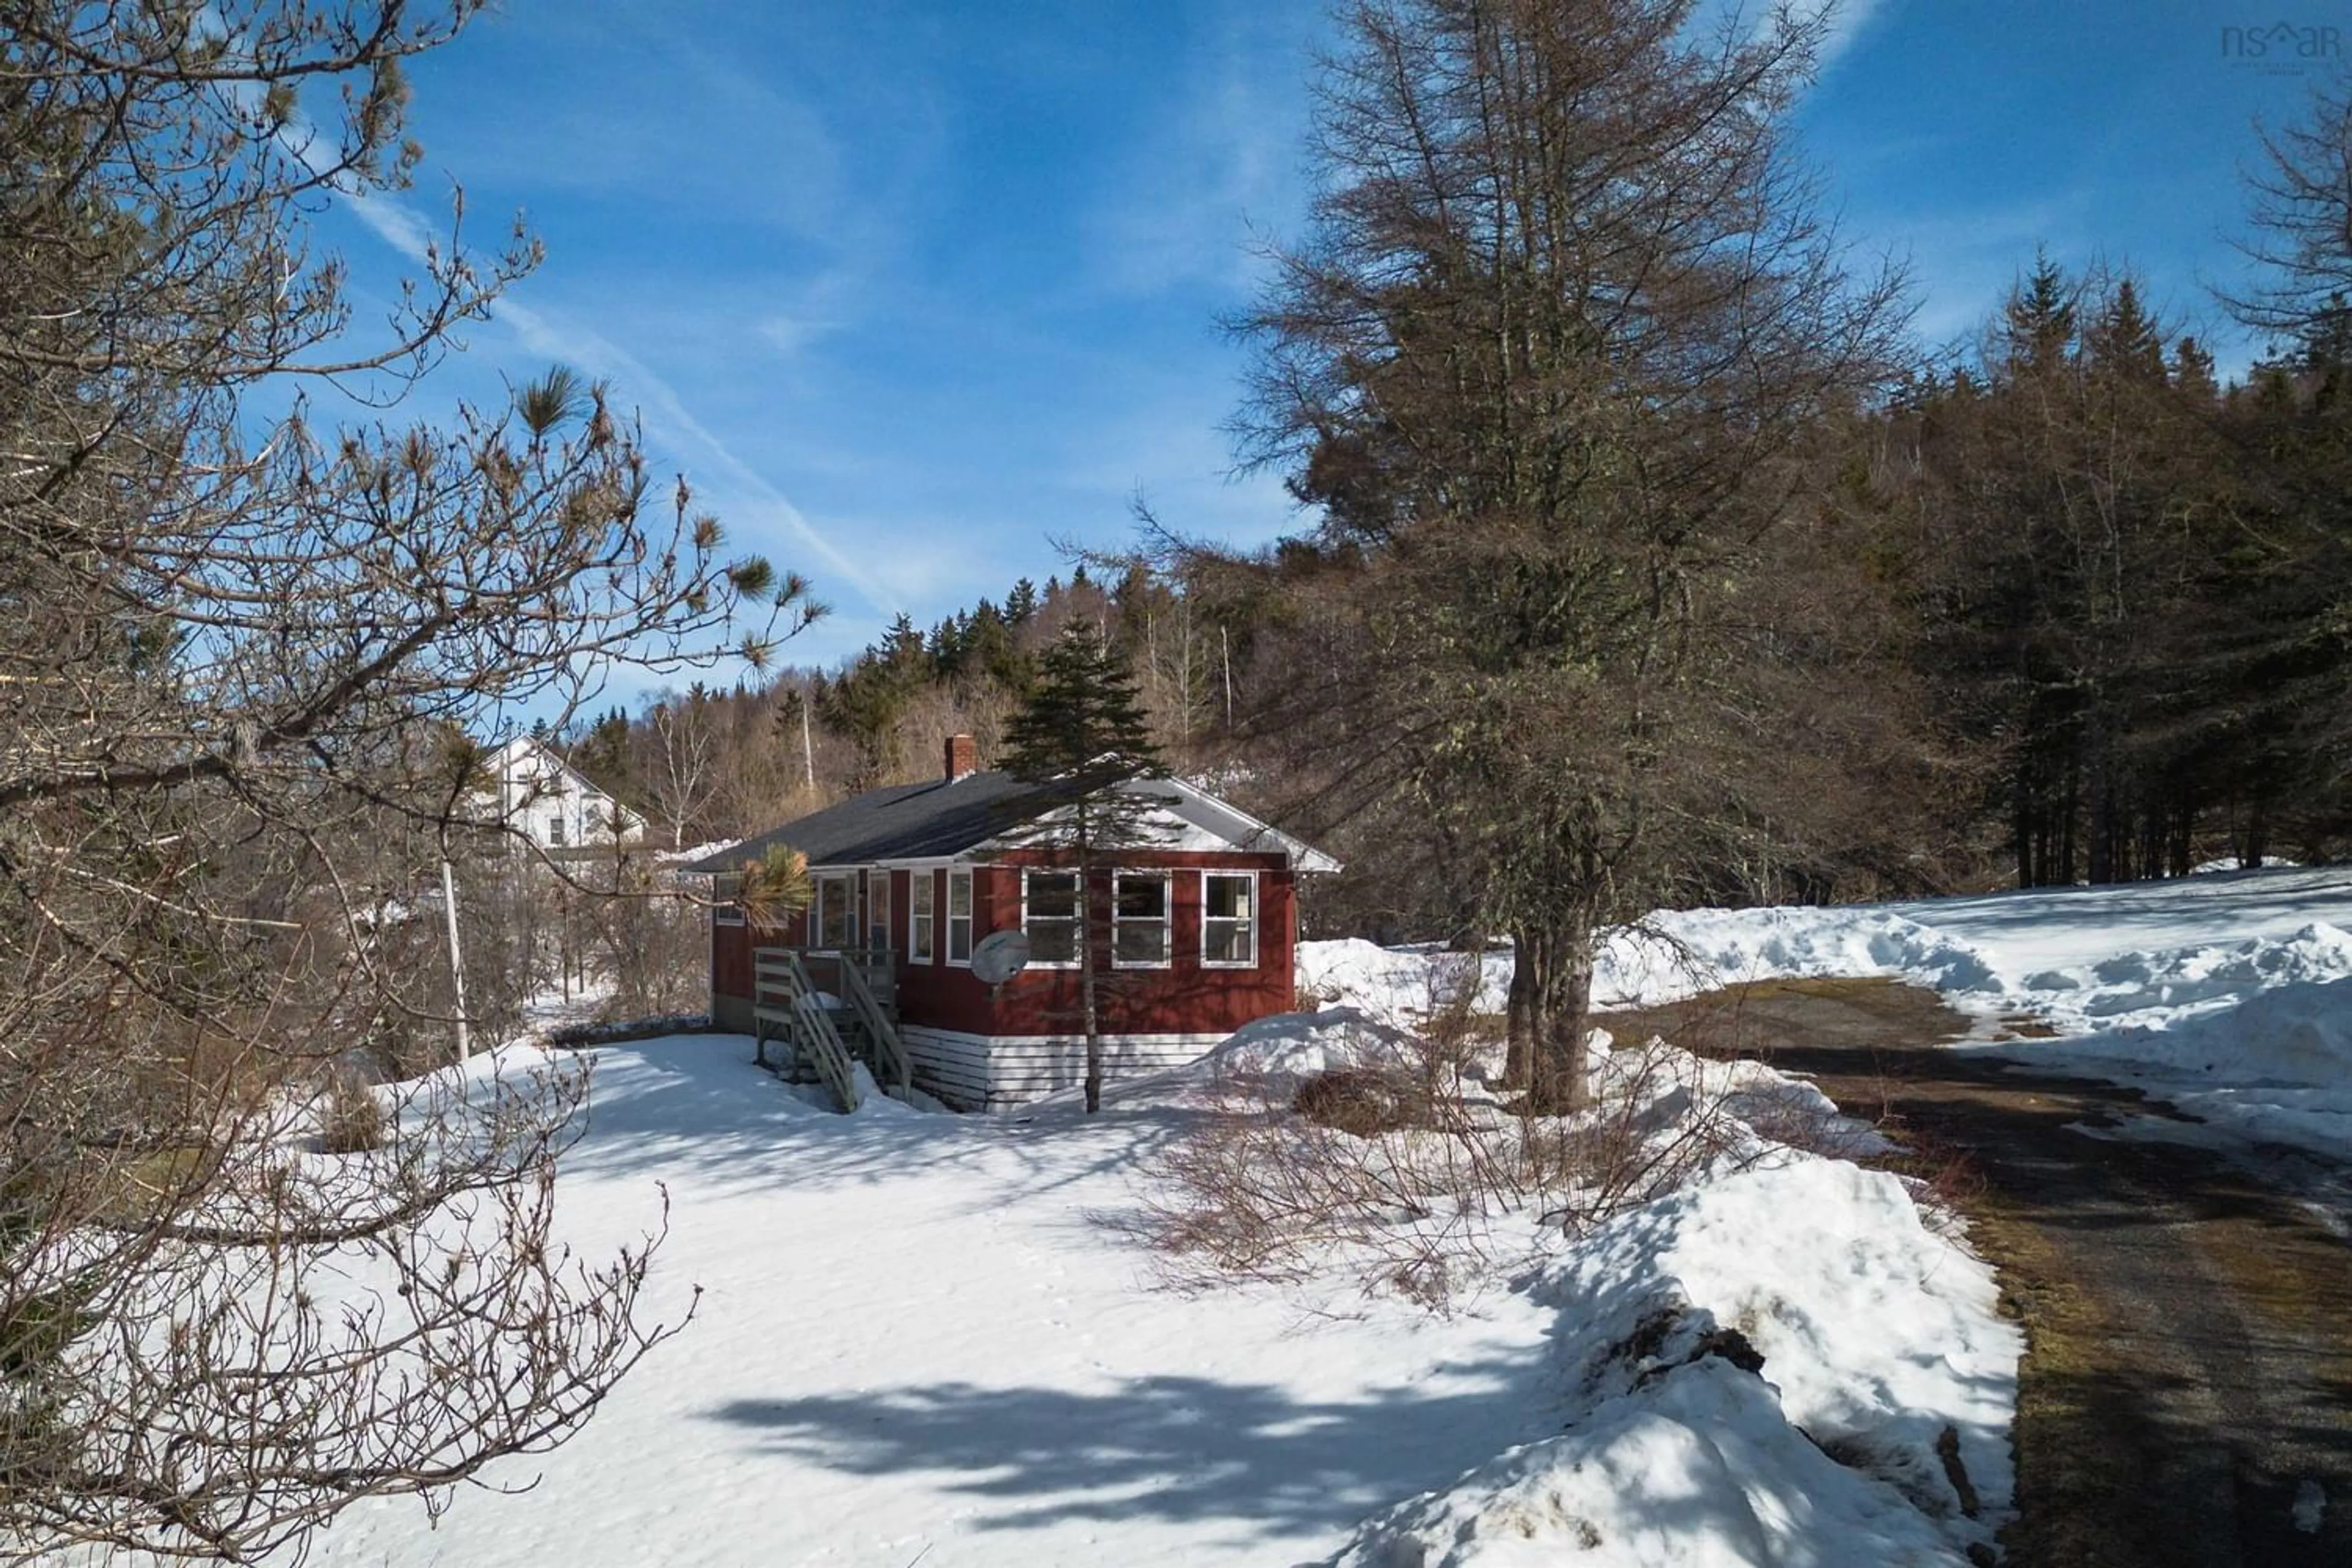 Cottage for 4397 105 Hwy, South Haven Nova Scotia B1X 1T7